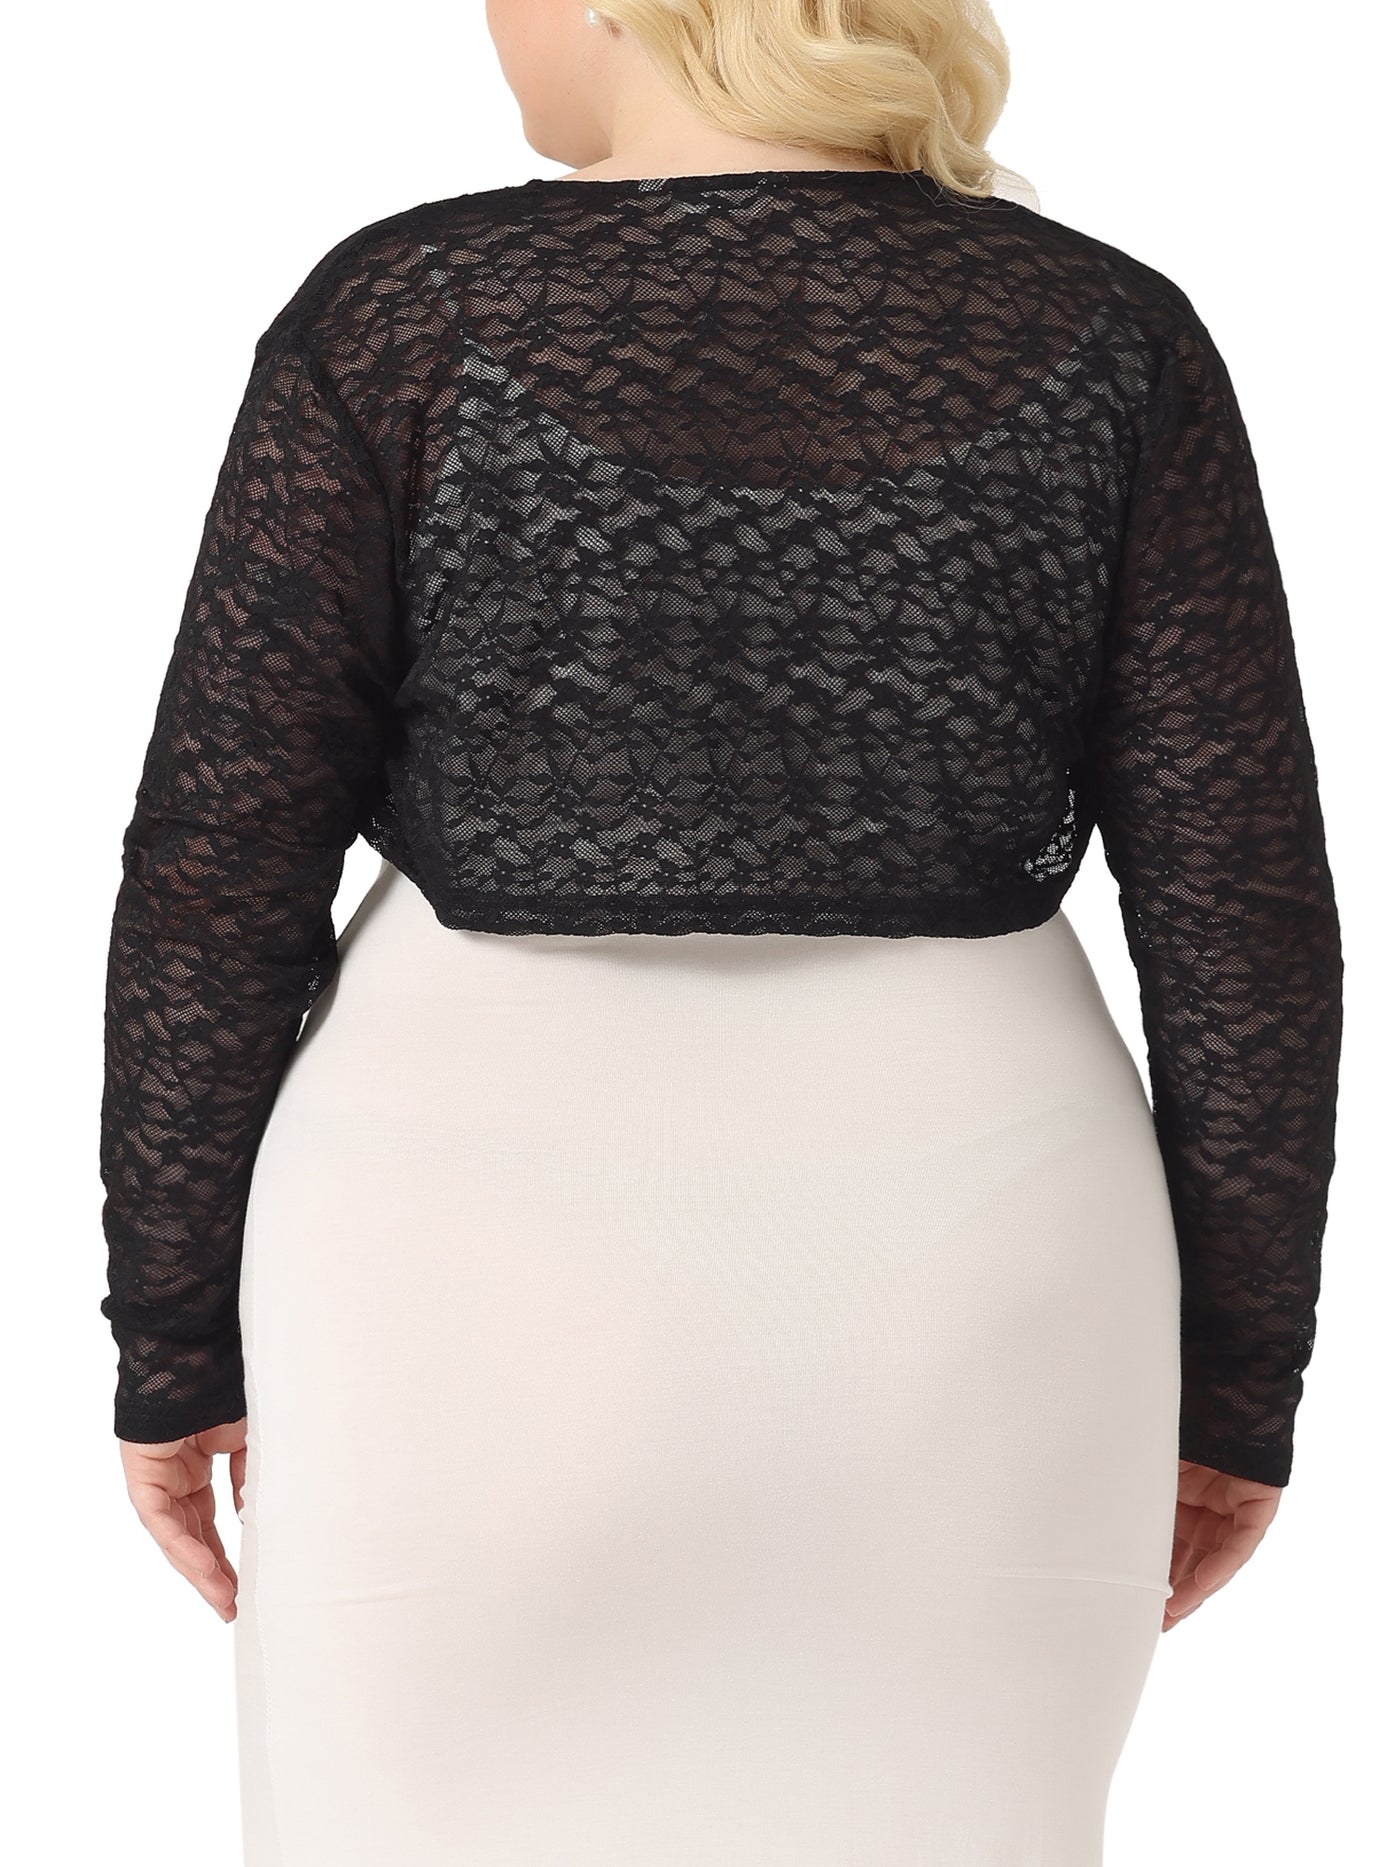 Bublédon Plus Size Sheer Open Front Cropped Long Sleeve Lace Shrug